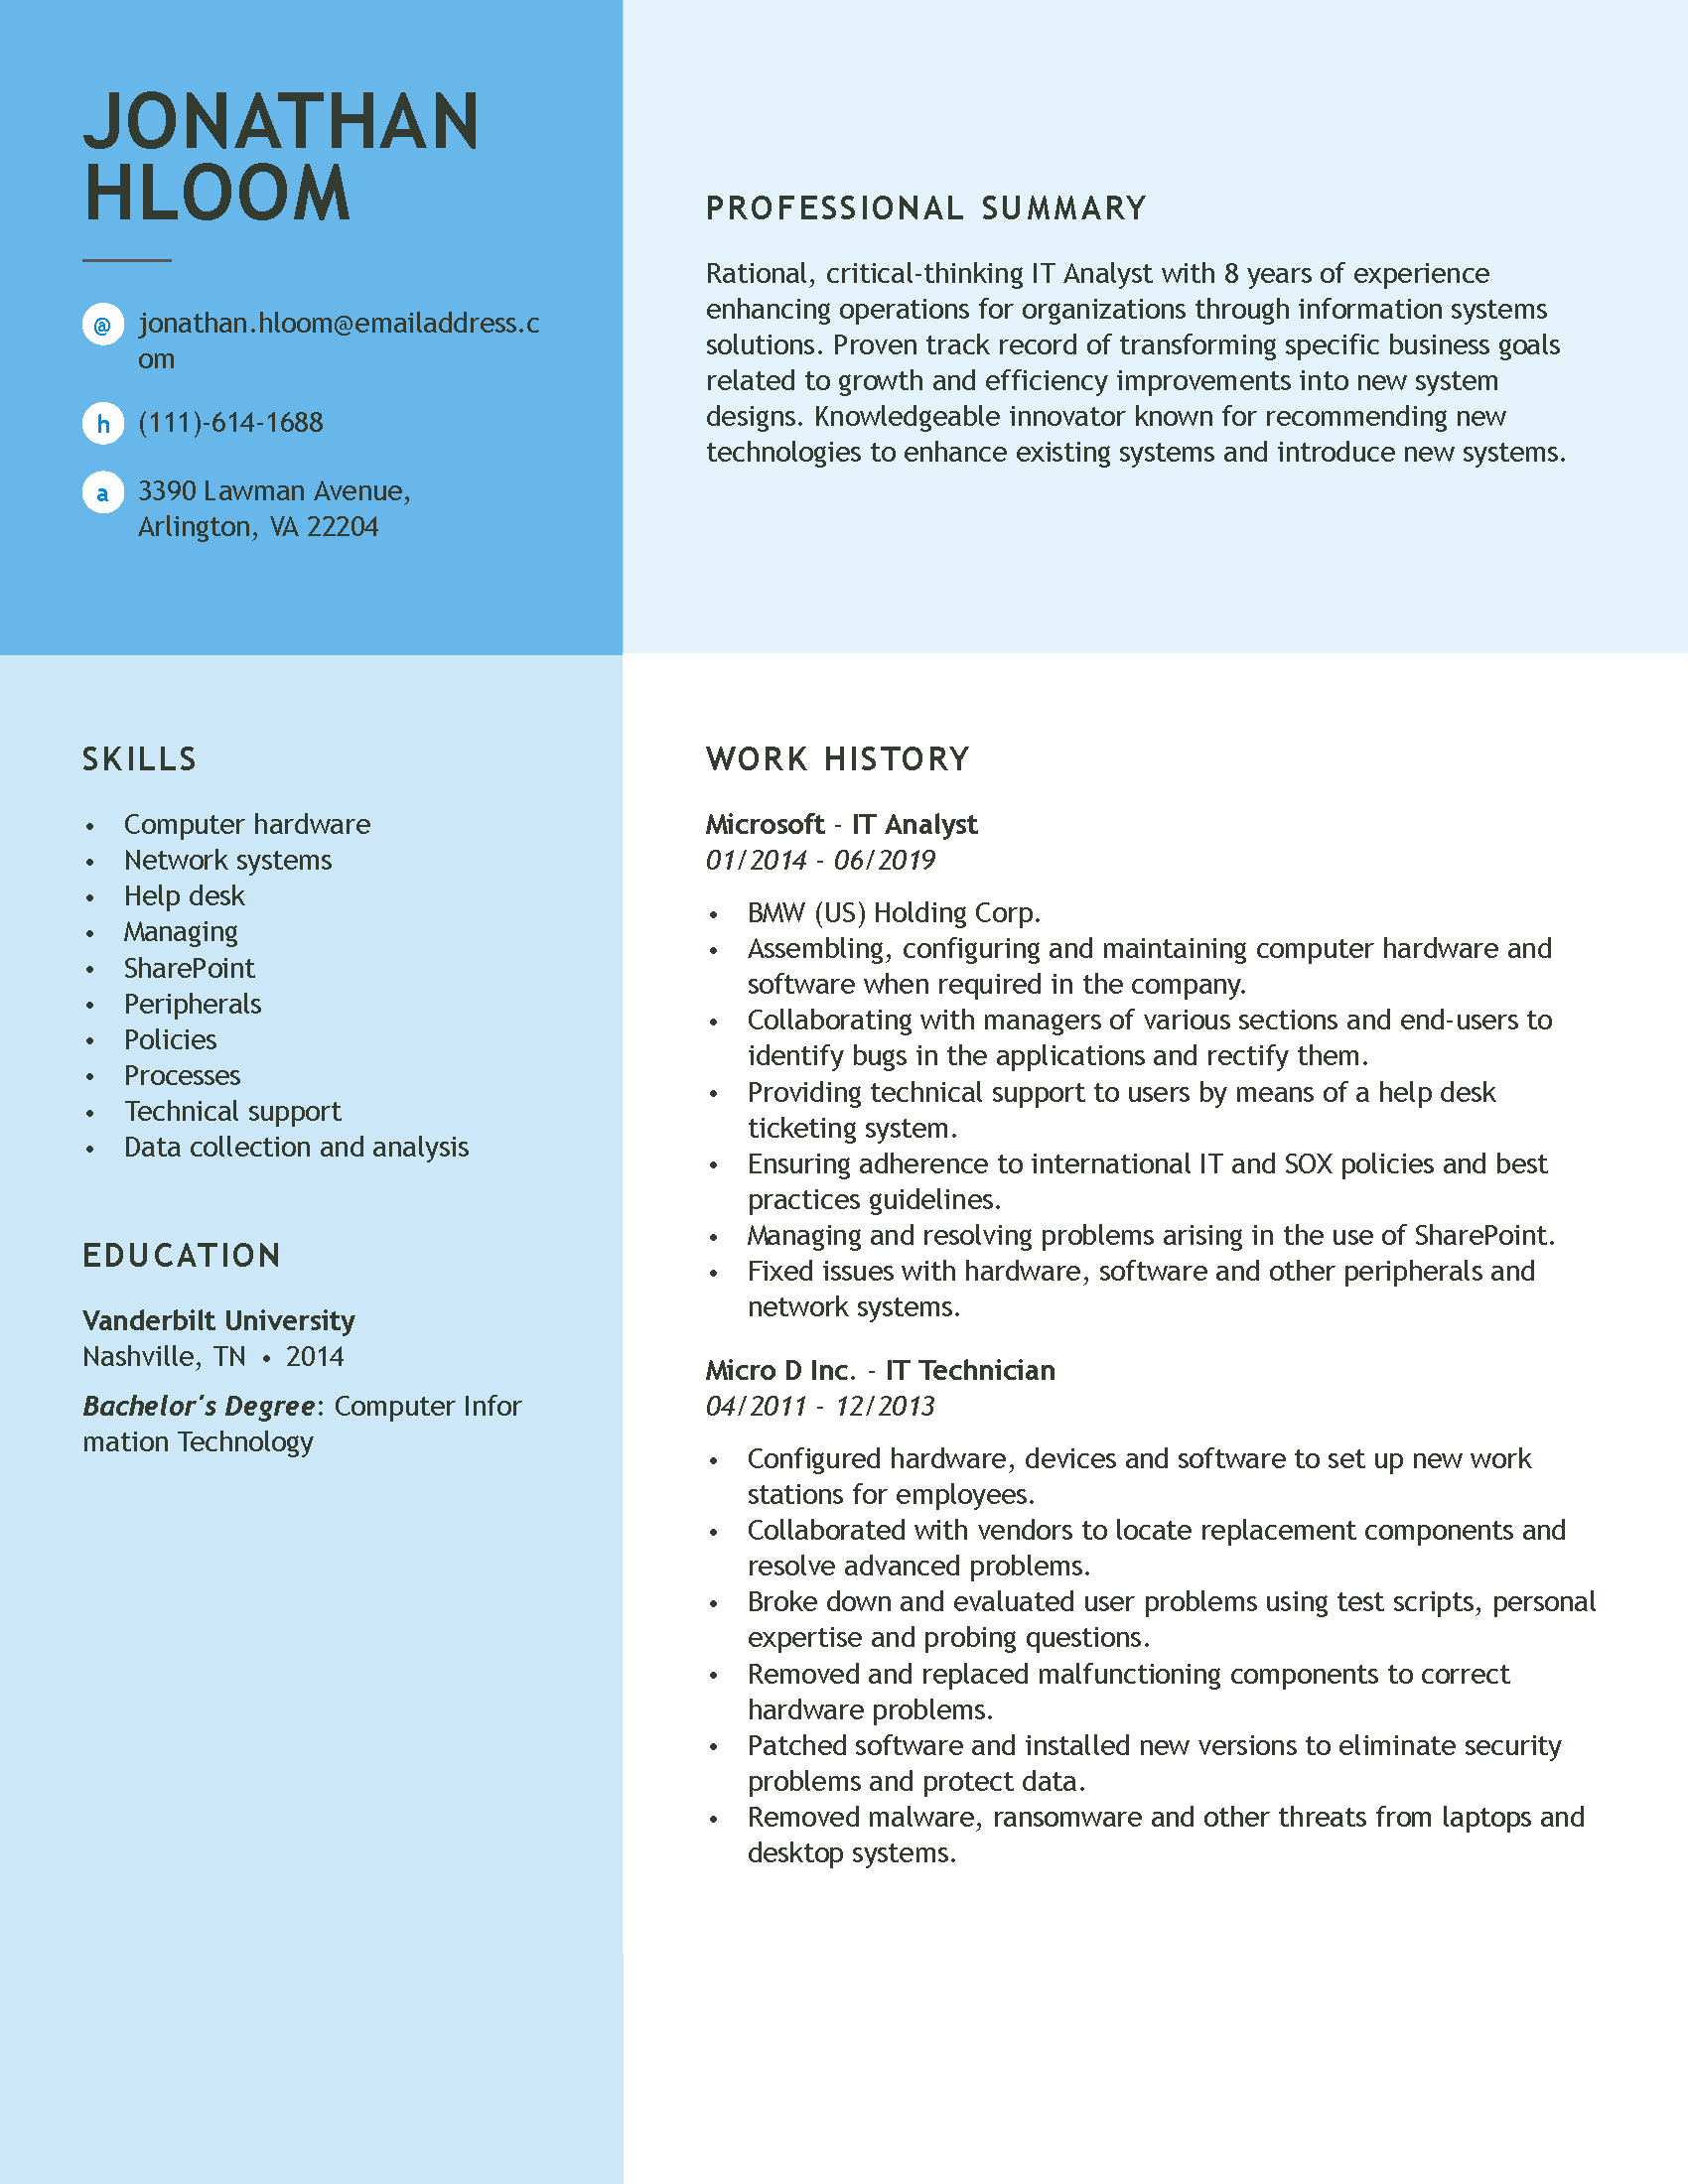 Professional Resume Examples: Our Most Popular Resumes in One Place